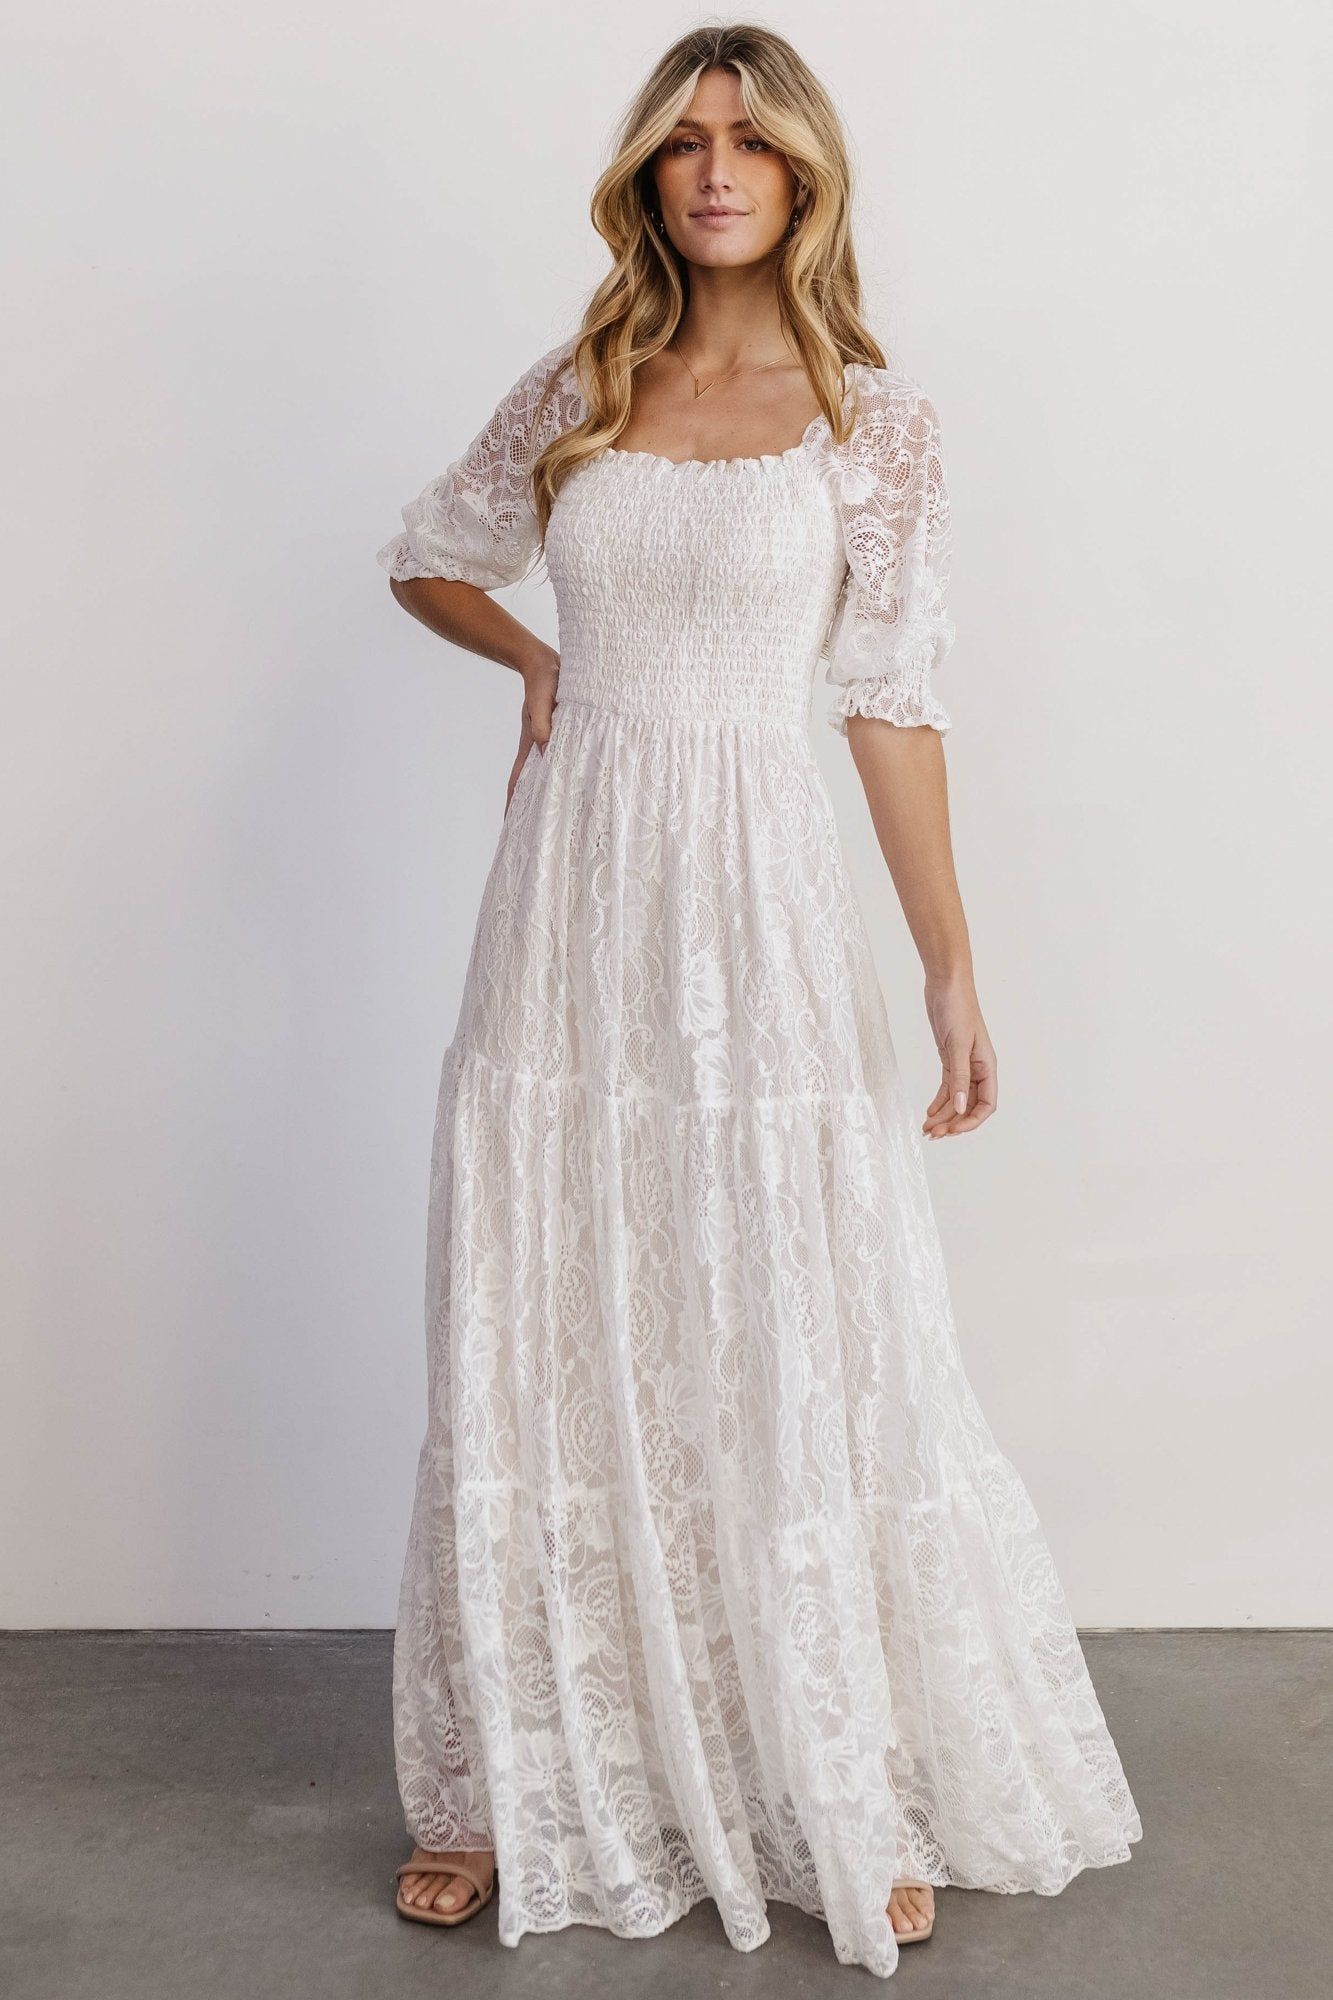 Angelic look with white lace maxi dress